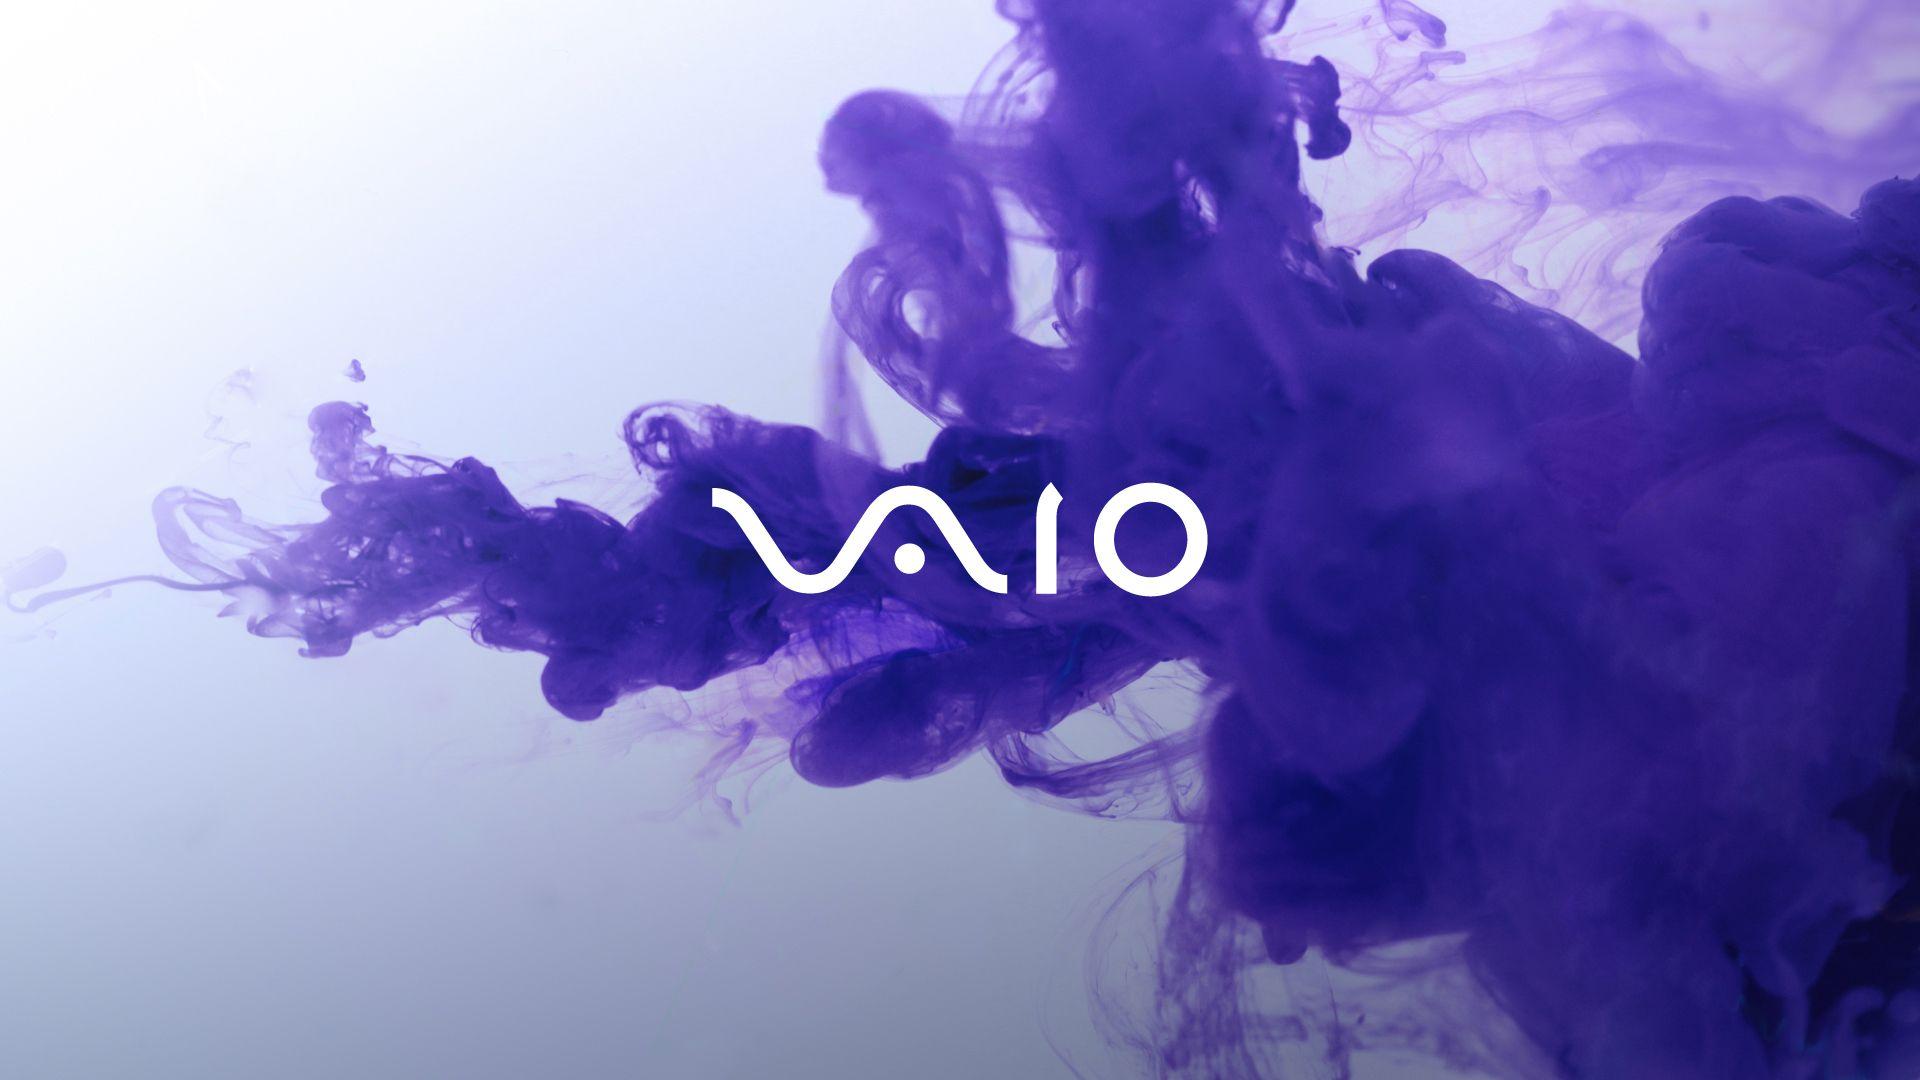 Sony Vaio Hd Wallpapers Top Free Sony Vaio Hd Backgrounds Wallpaperaccess